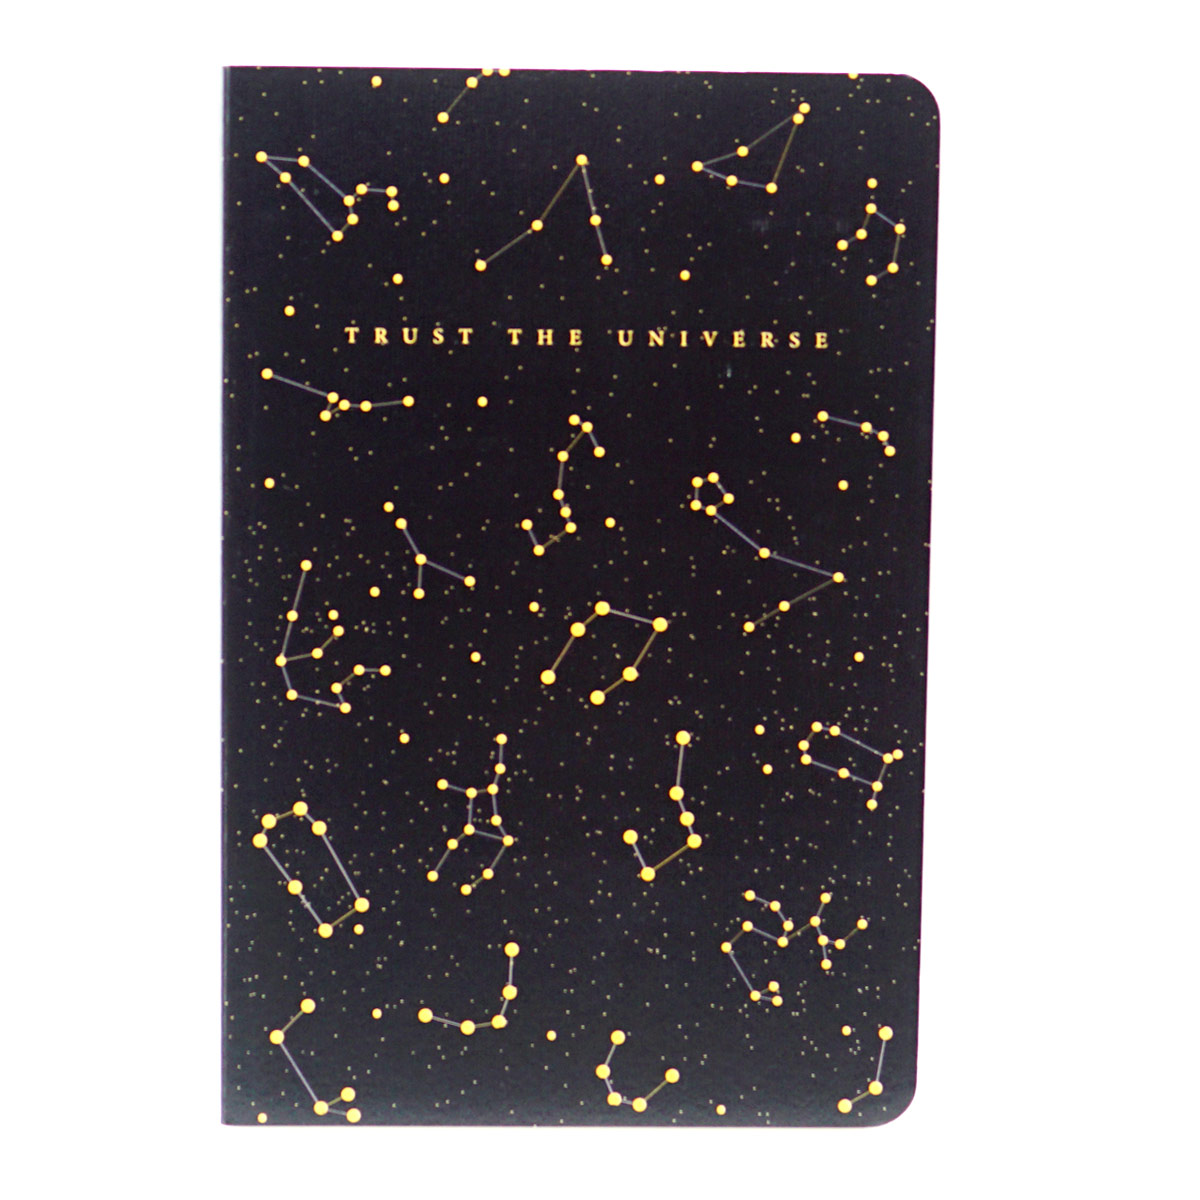 Factor A5 Black Color with Zodiac Design Soft Bound Ruled Notebook 90 GSM With 160 Pages SKU 50224